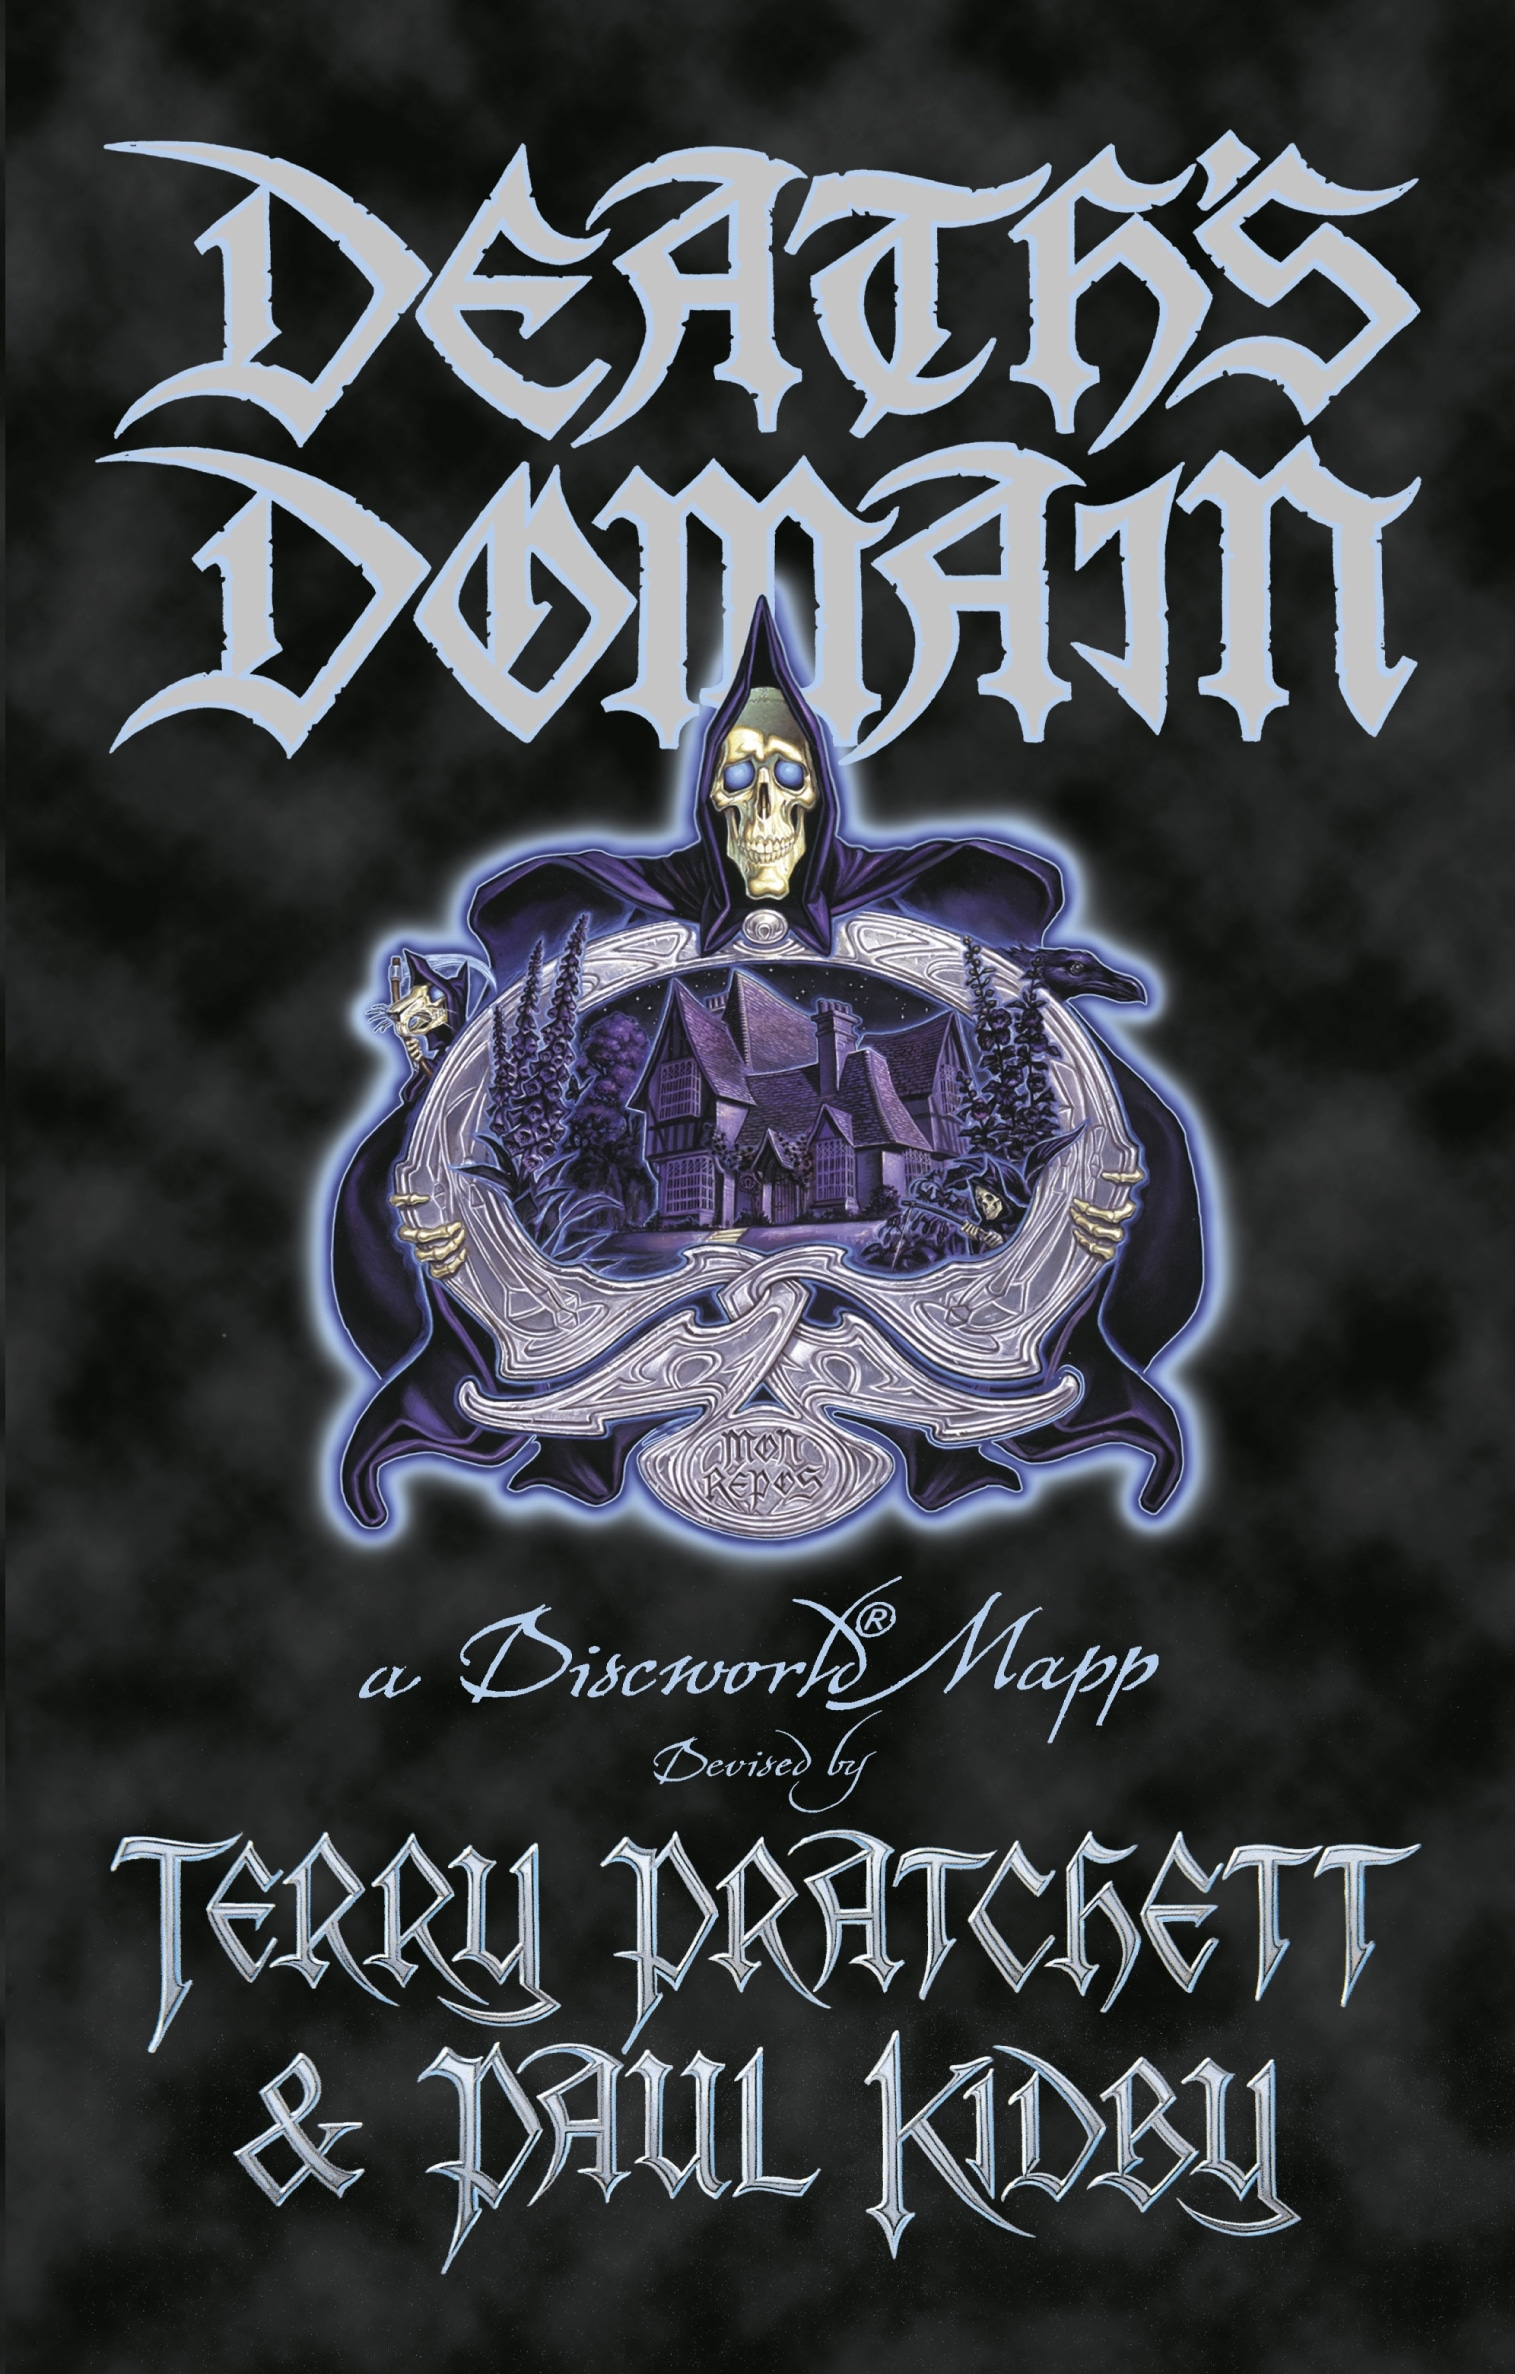 Book “Death's Domain” by Terry Pratchett — May 1, 1999